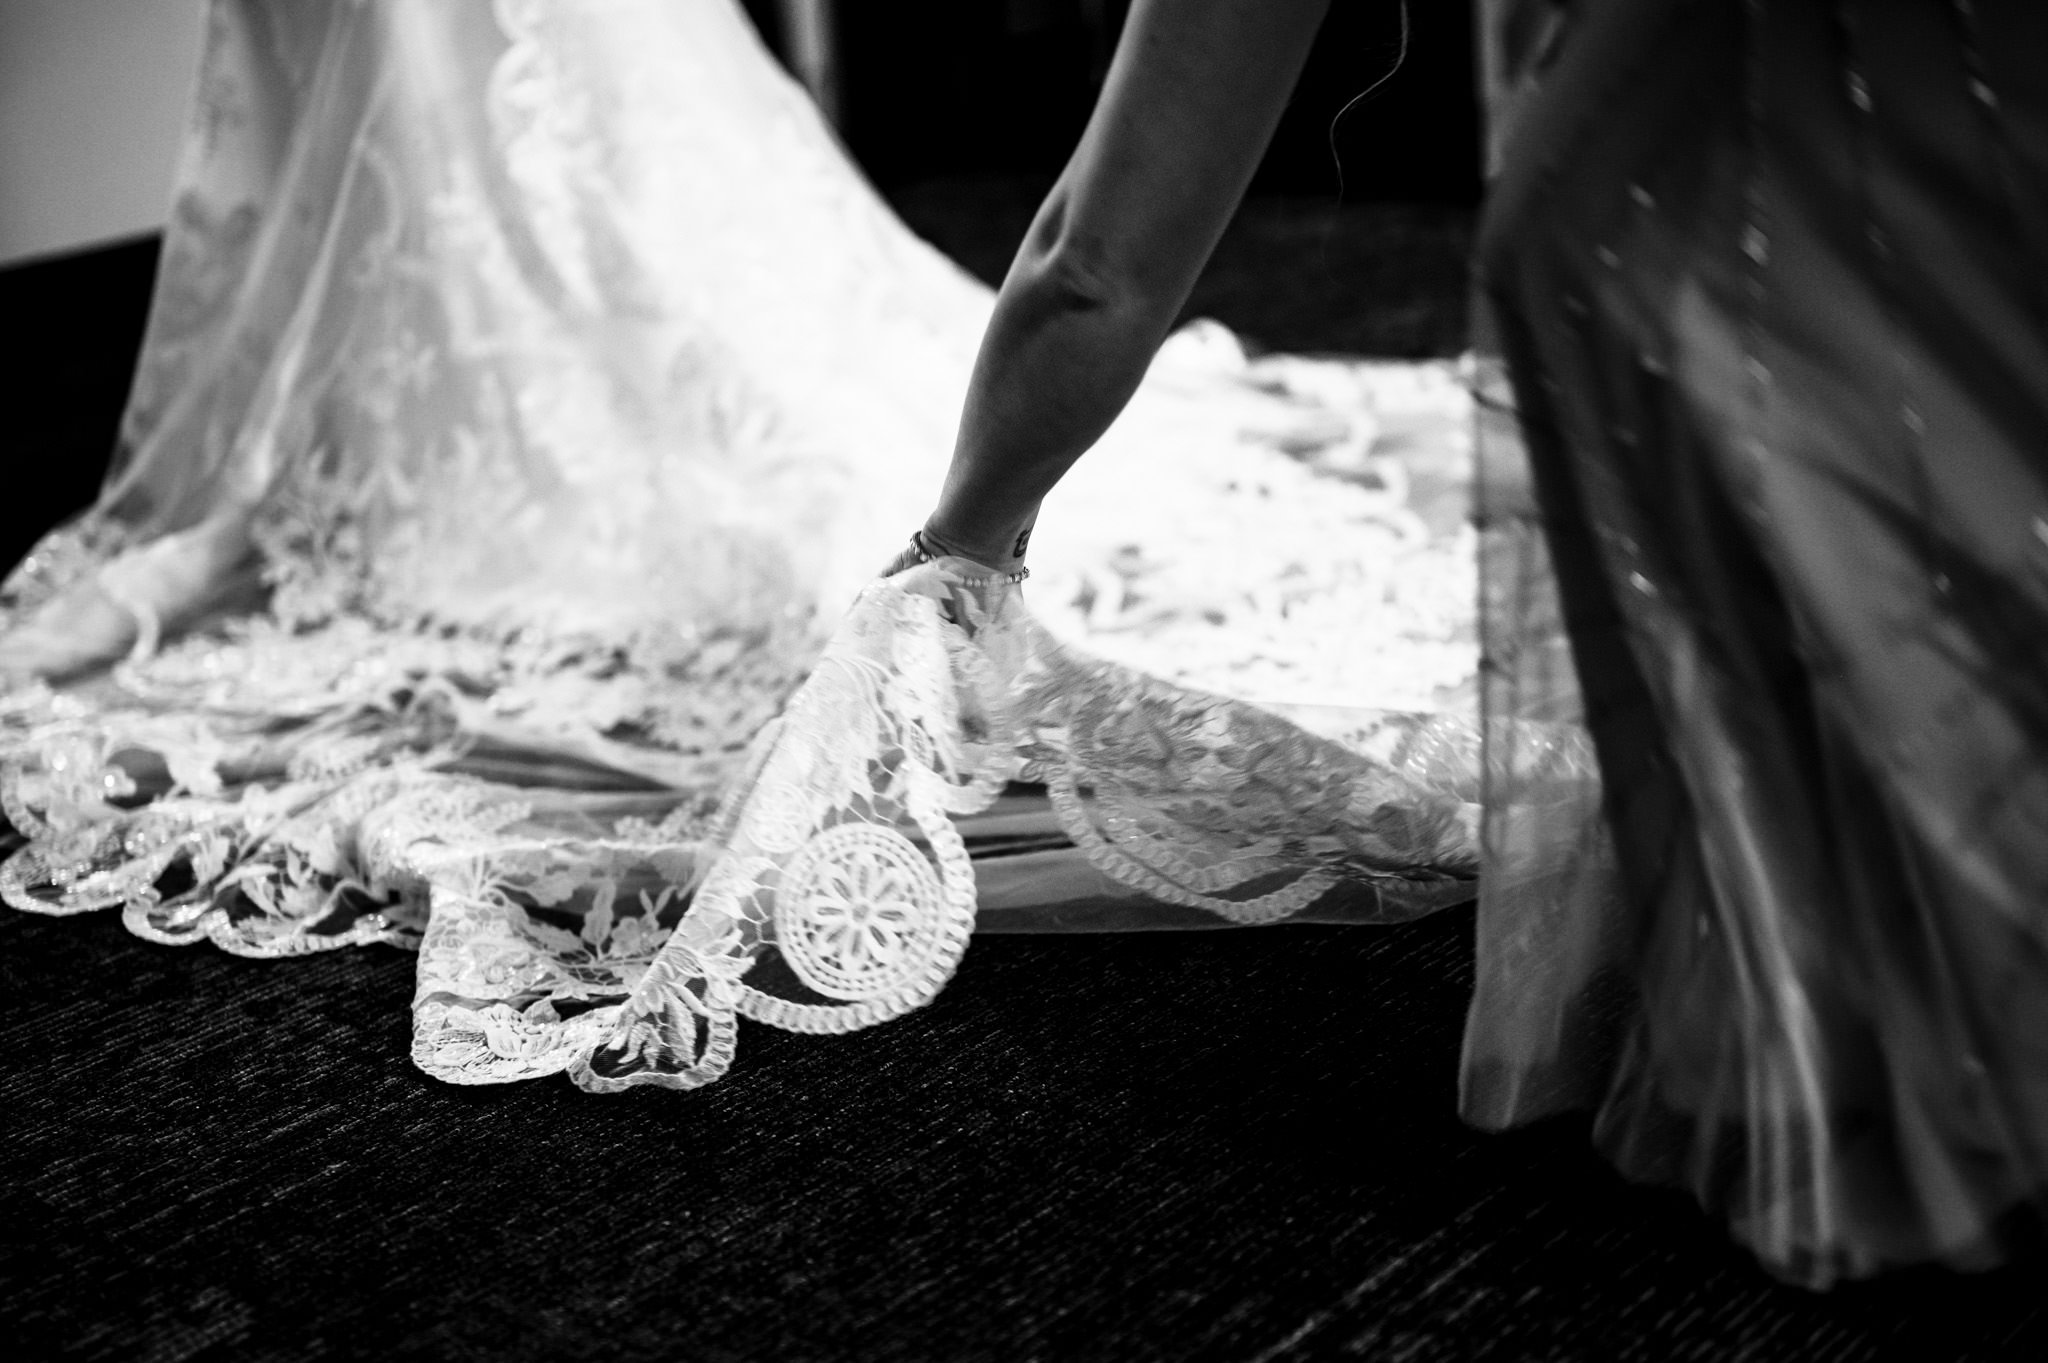 A dress captured by a wedding photographer in Raleigh, NC.